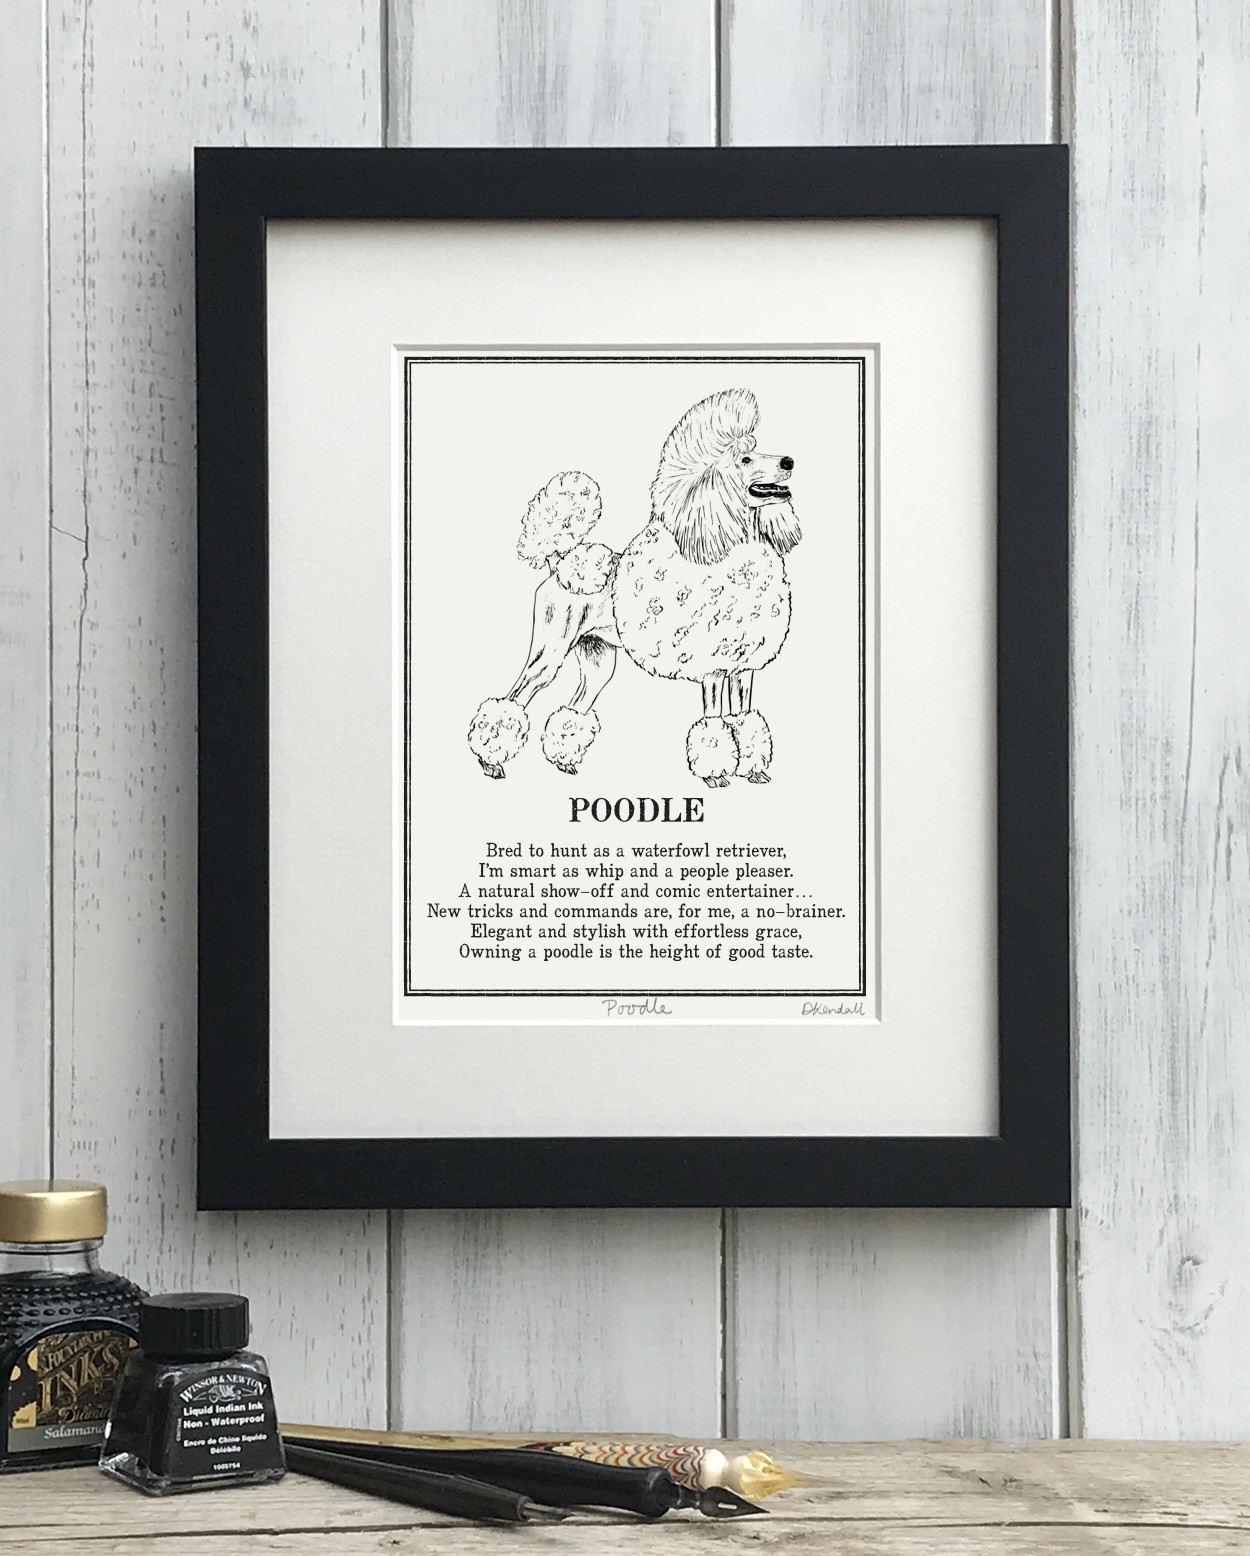 Poodle Continental Clip Doggerel Illustrated Poem Art Print | The Enlightened Hound